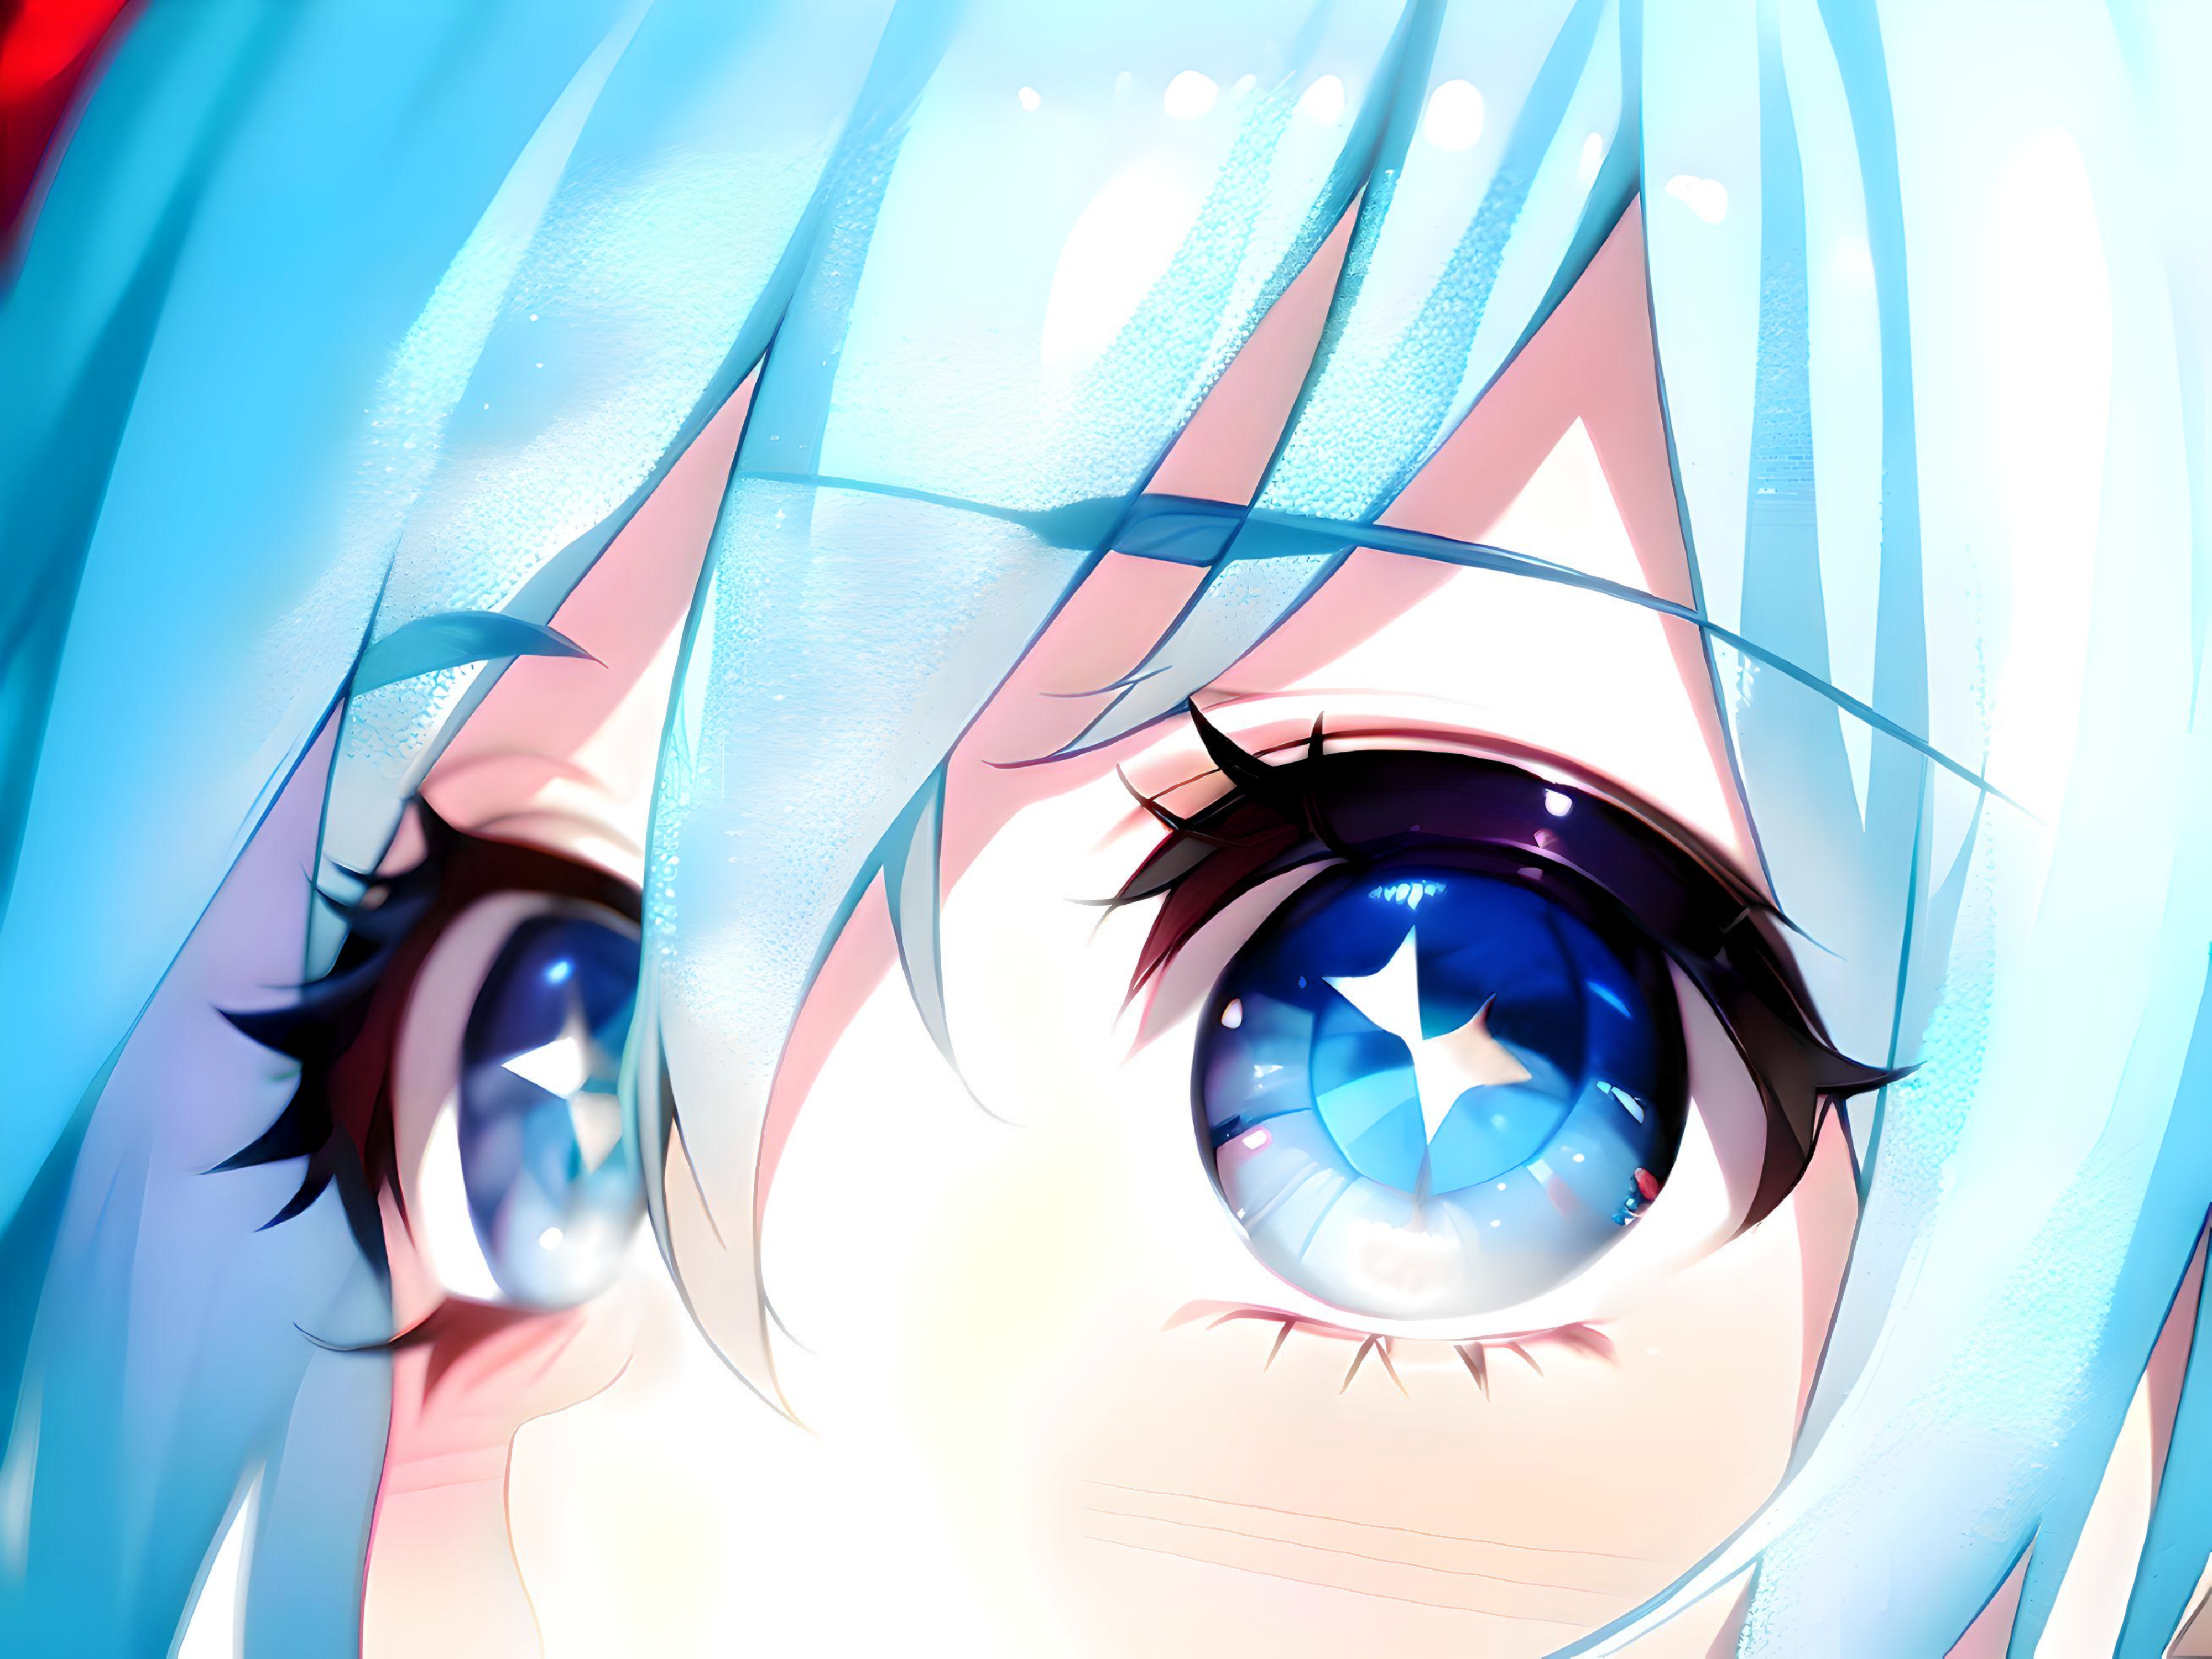 dh super close up on an anime face with blur by HamaS on DeviantArt